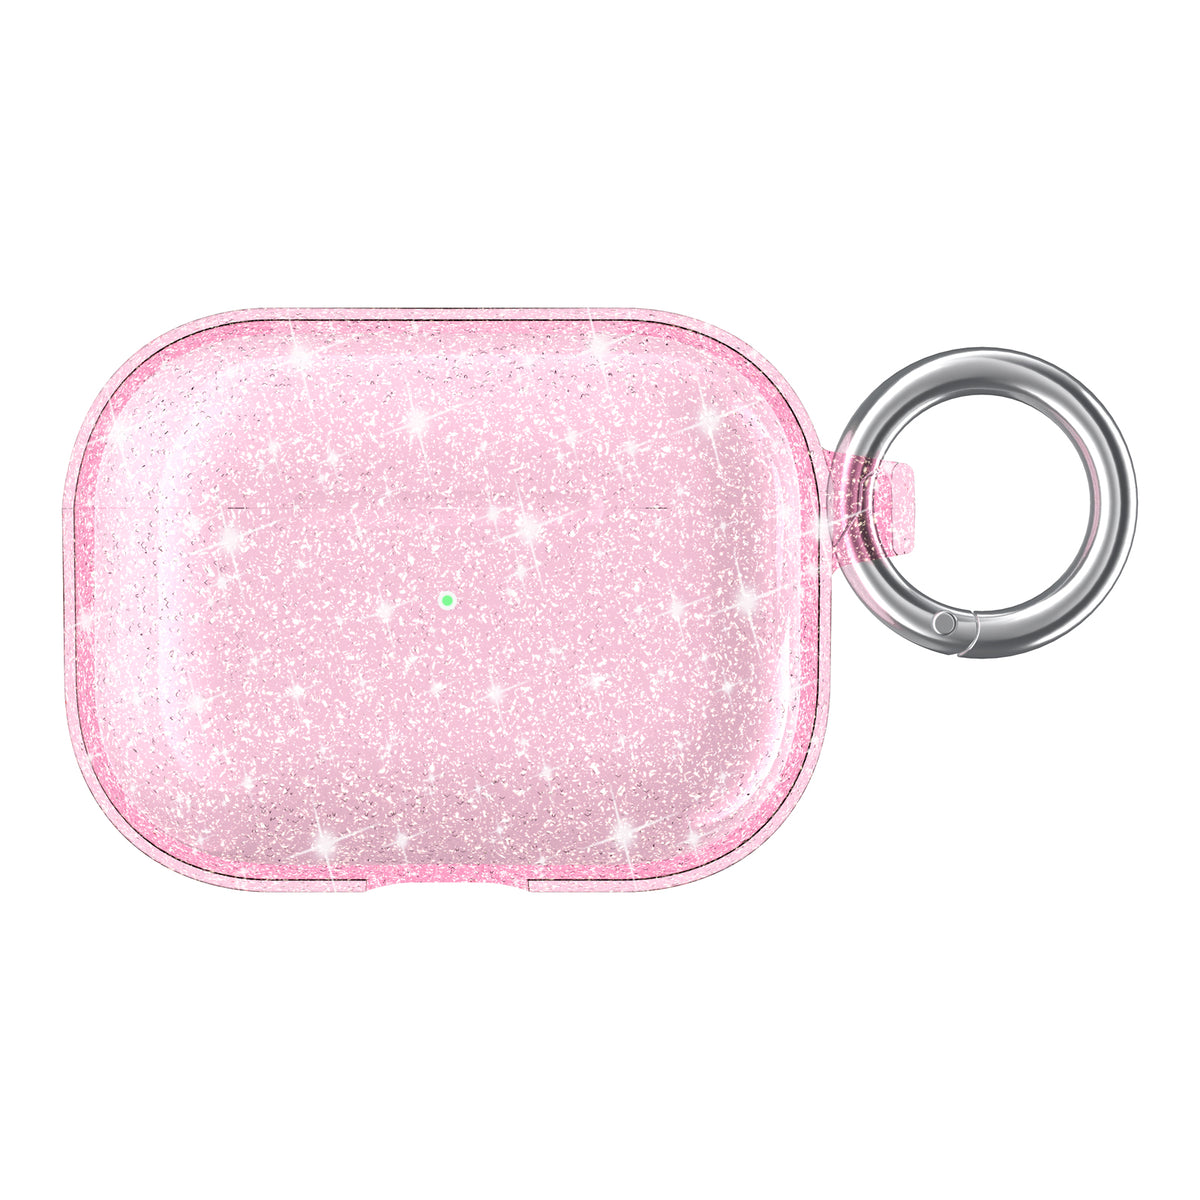 Airpod Pro Shimmer Case Pink